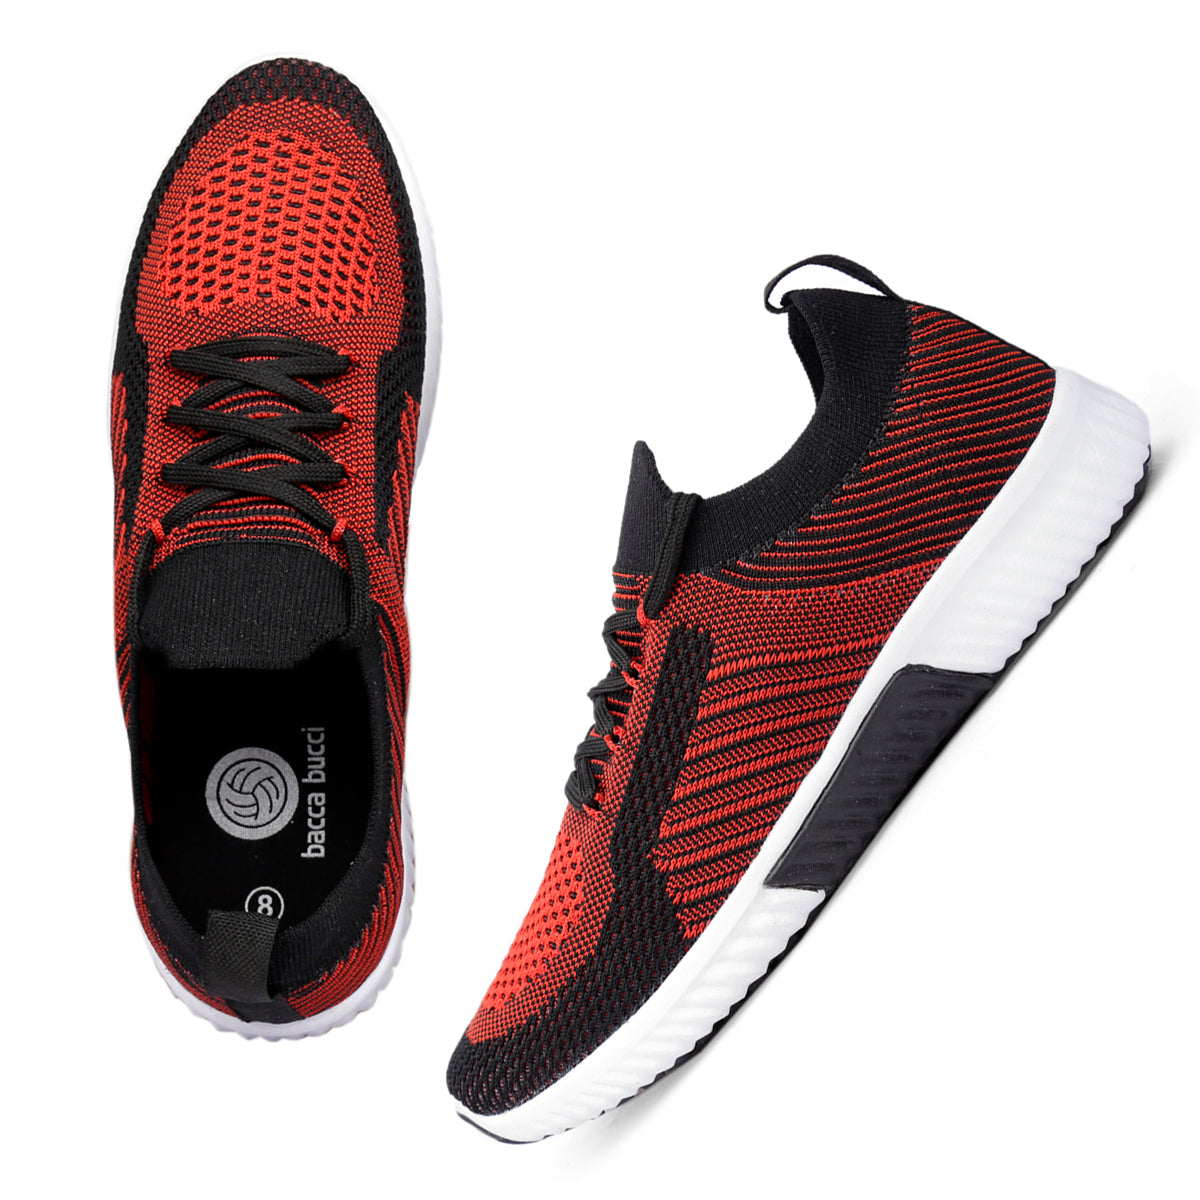 Bacca Bucci JOY Running Shoes, Lightweight Workout Sport Athletic Shoes for Men - Bacca Bucci